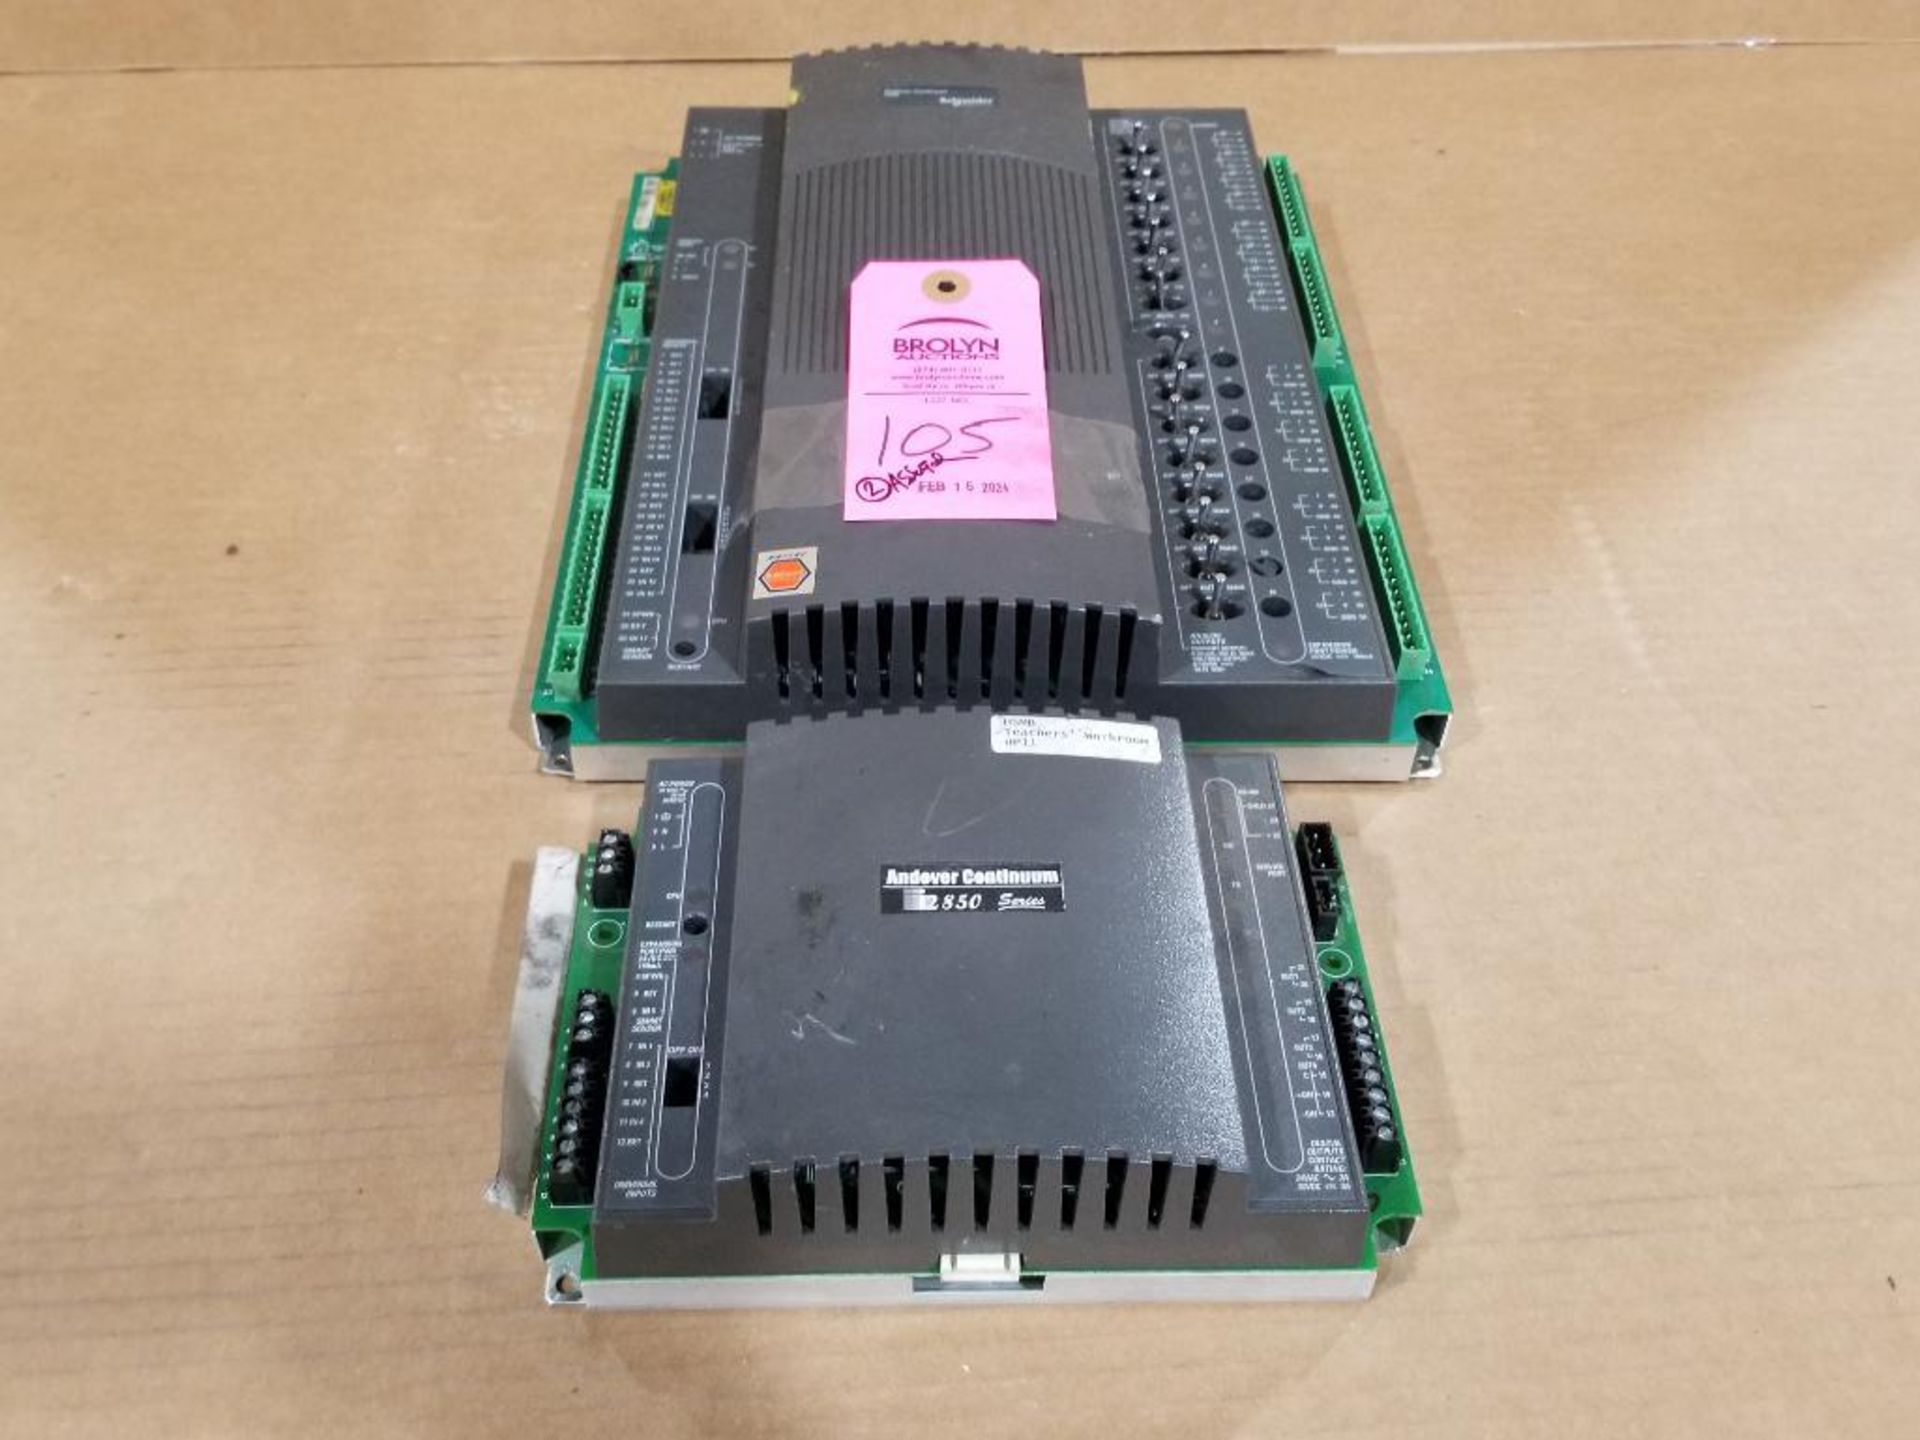 Qty 2 - Schneider Electric controller. Andover Continuum. Model B3920 and i2851.